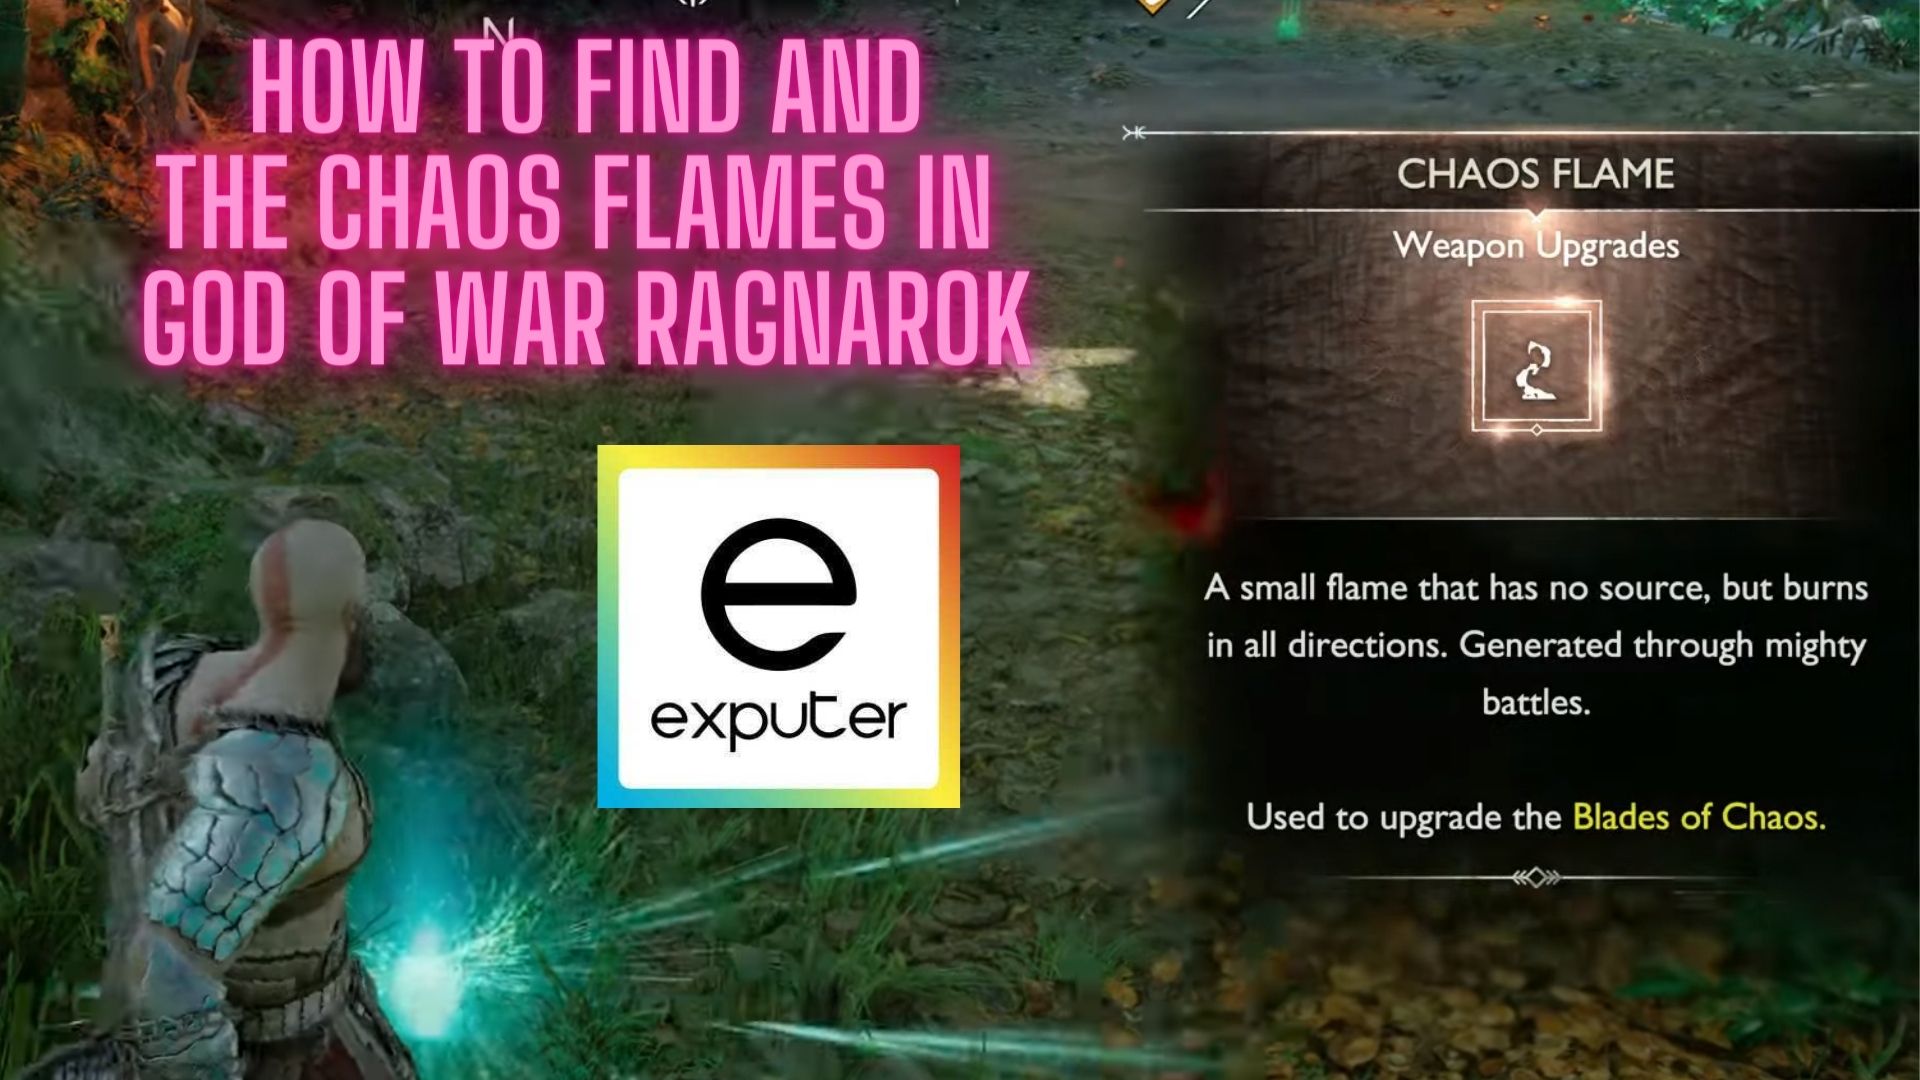 How To Find And Get Chaos Flames In God Of War Ragnarok